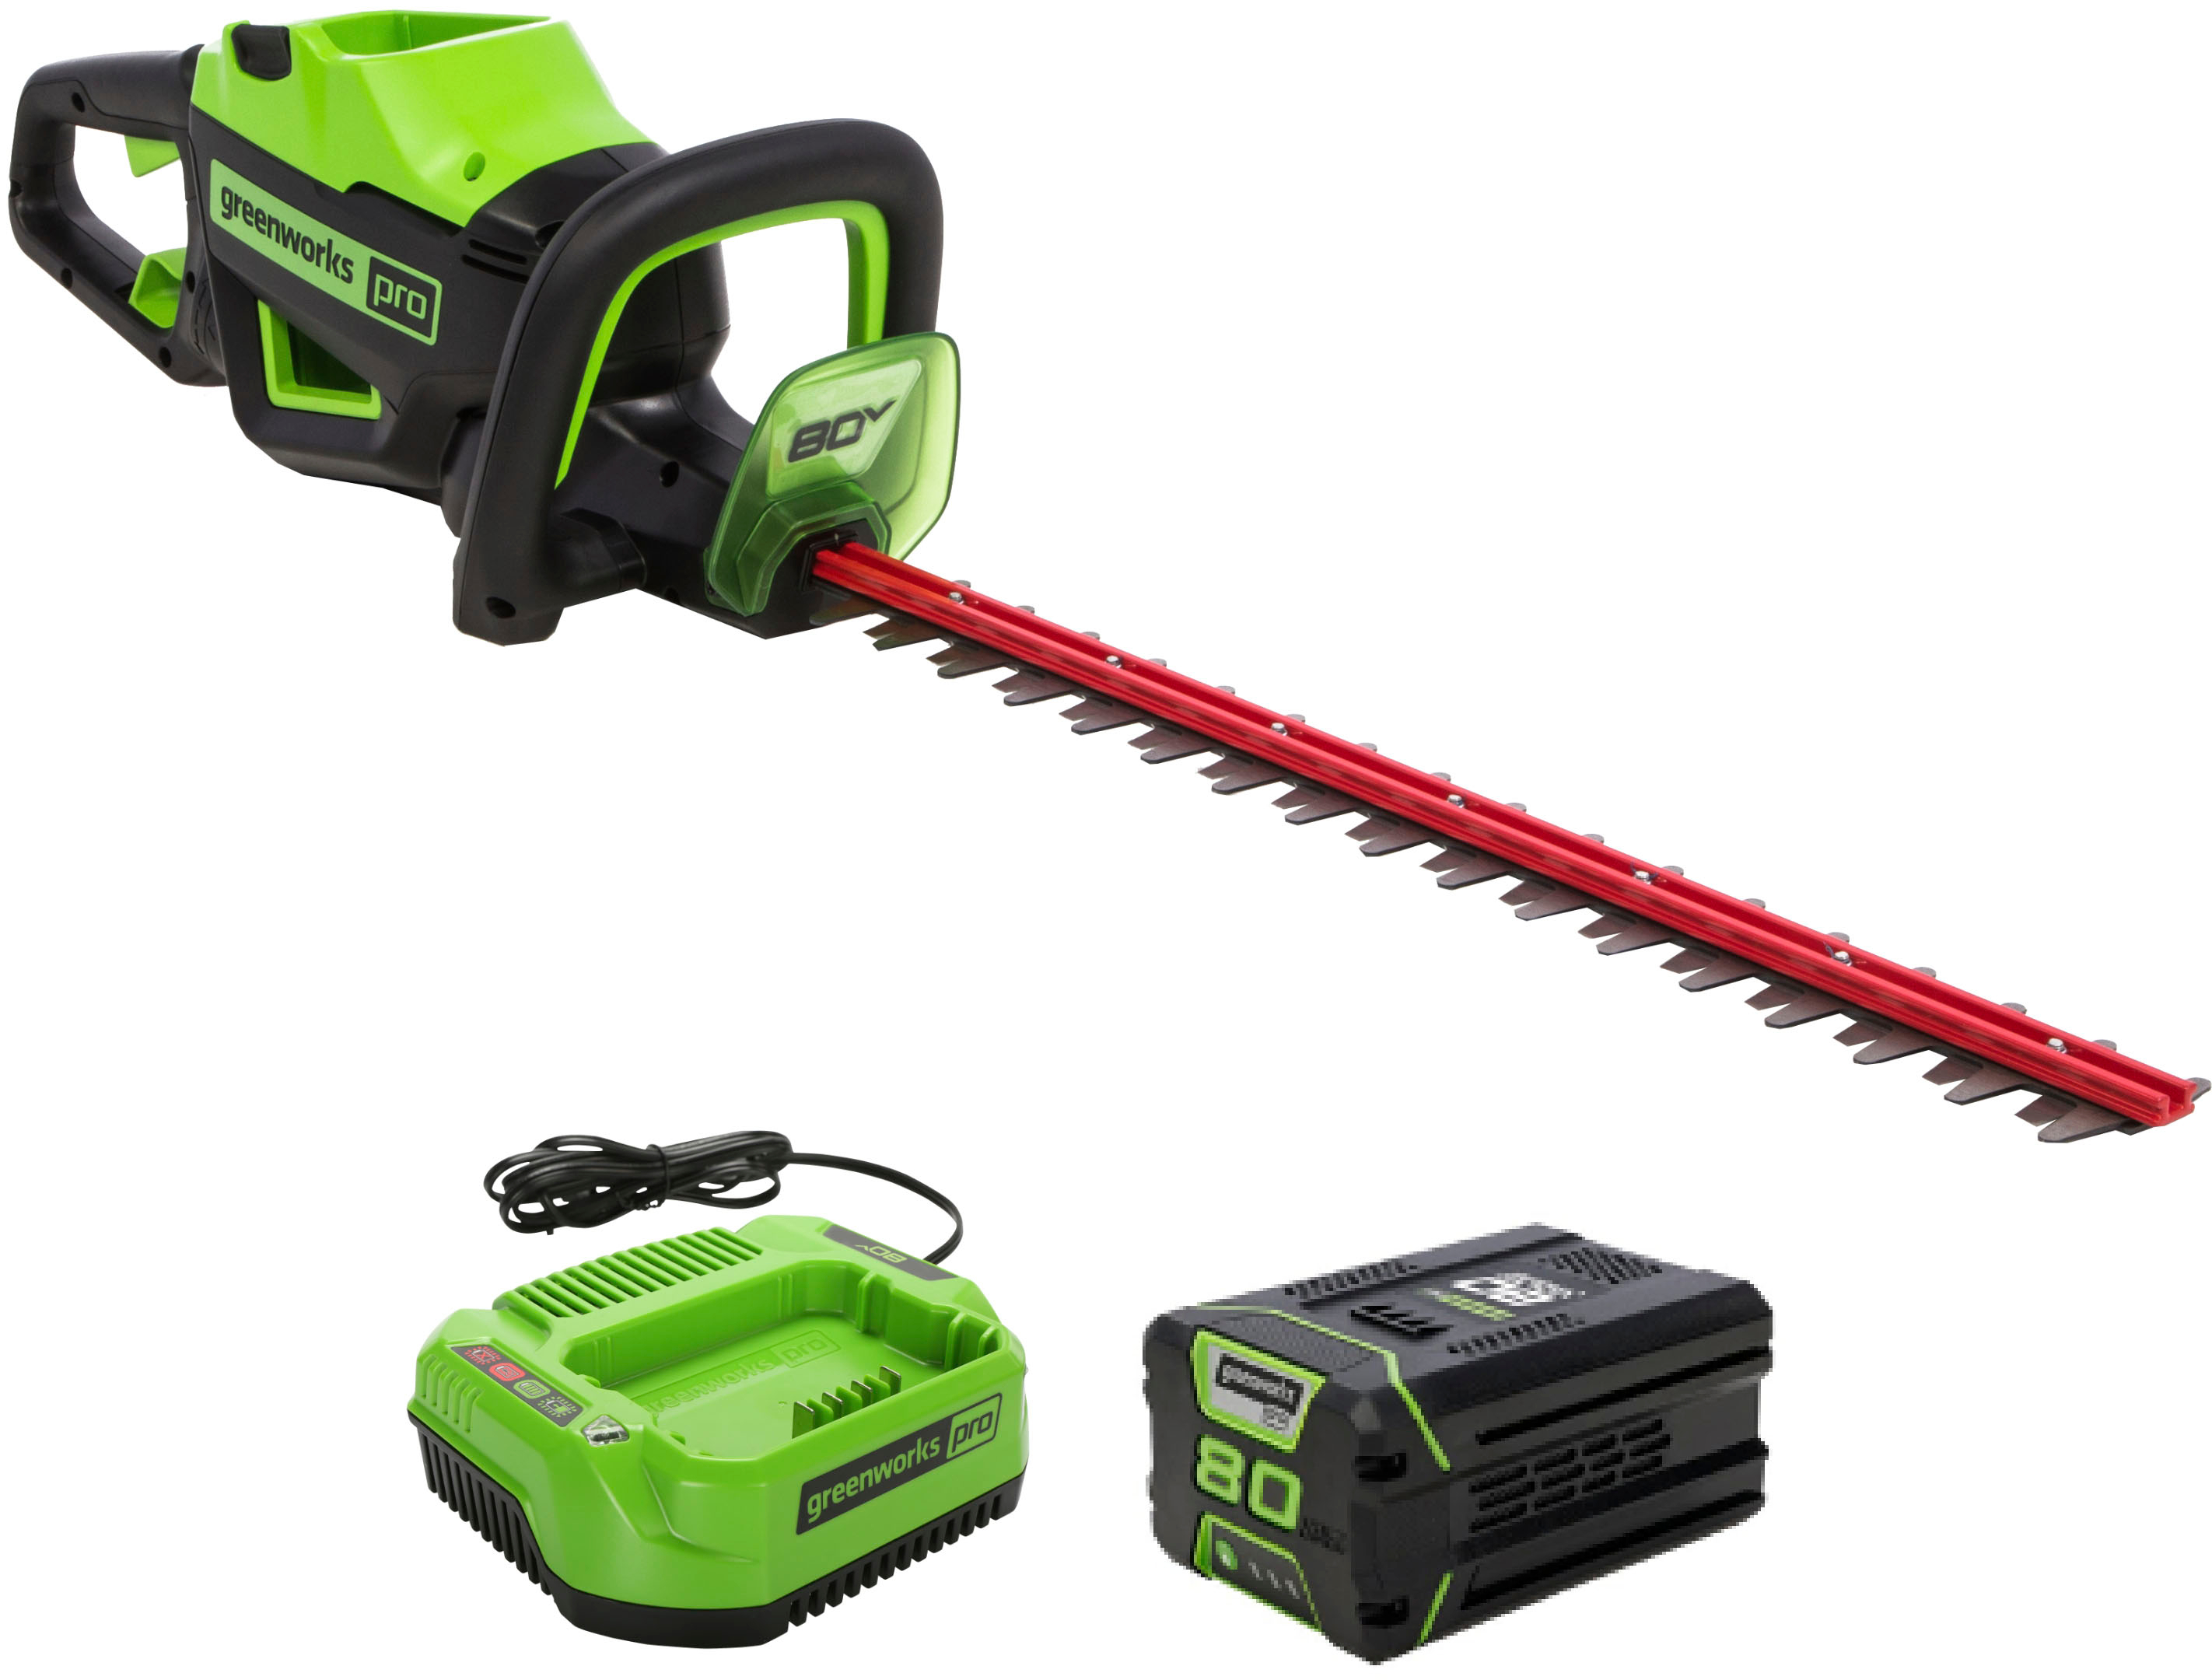 Greenworks 80-Volt 26-Inch Cordless Brushless Hedge Trimmer (1 x 2.0Ah  Battery and 1 x Charger) Green 2203902/HT80L212 - Best Buy